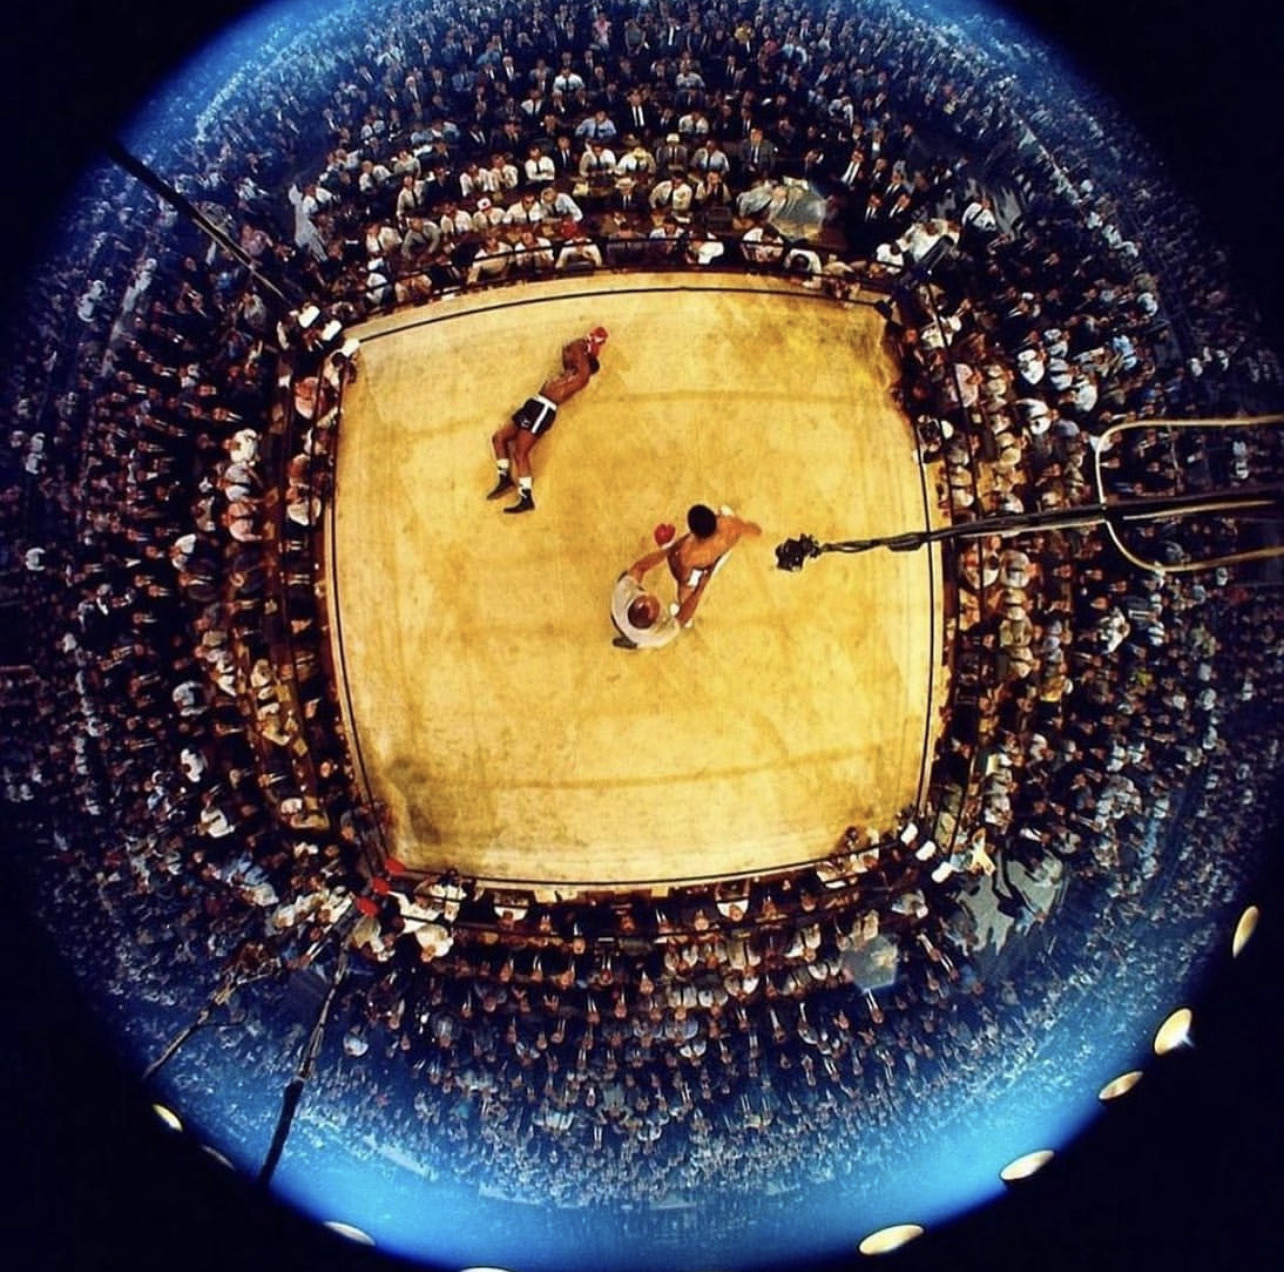 XXX ee7:Over head knockouts from Muhammad Ali photo